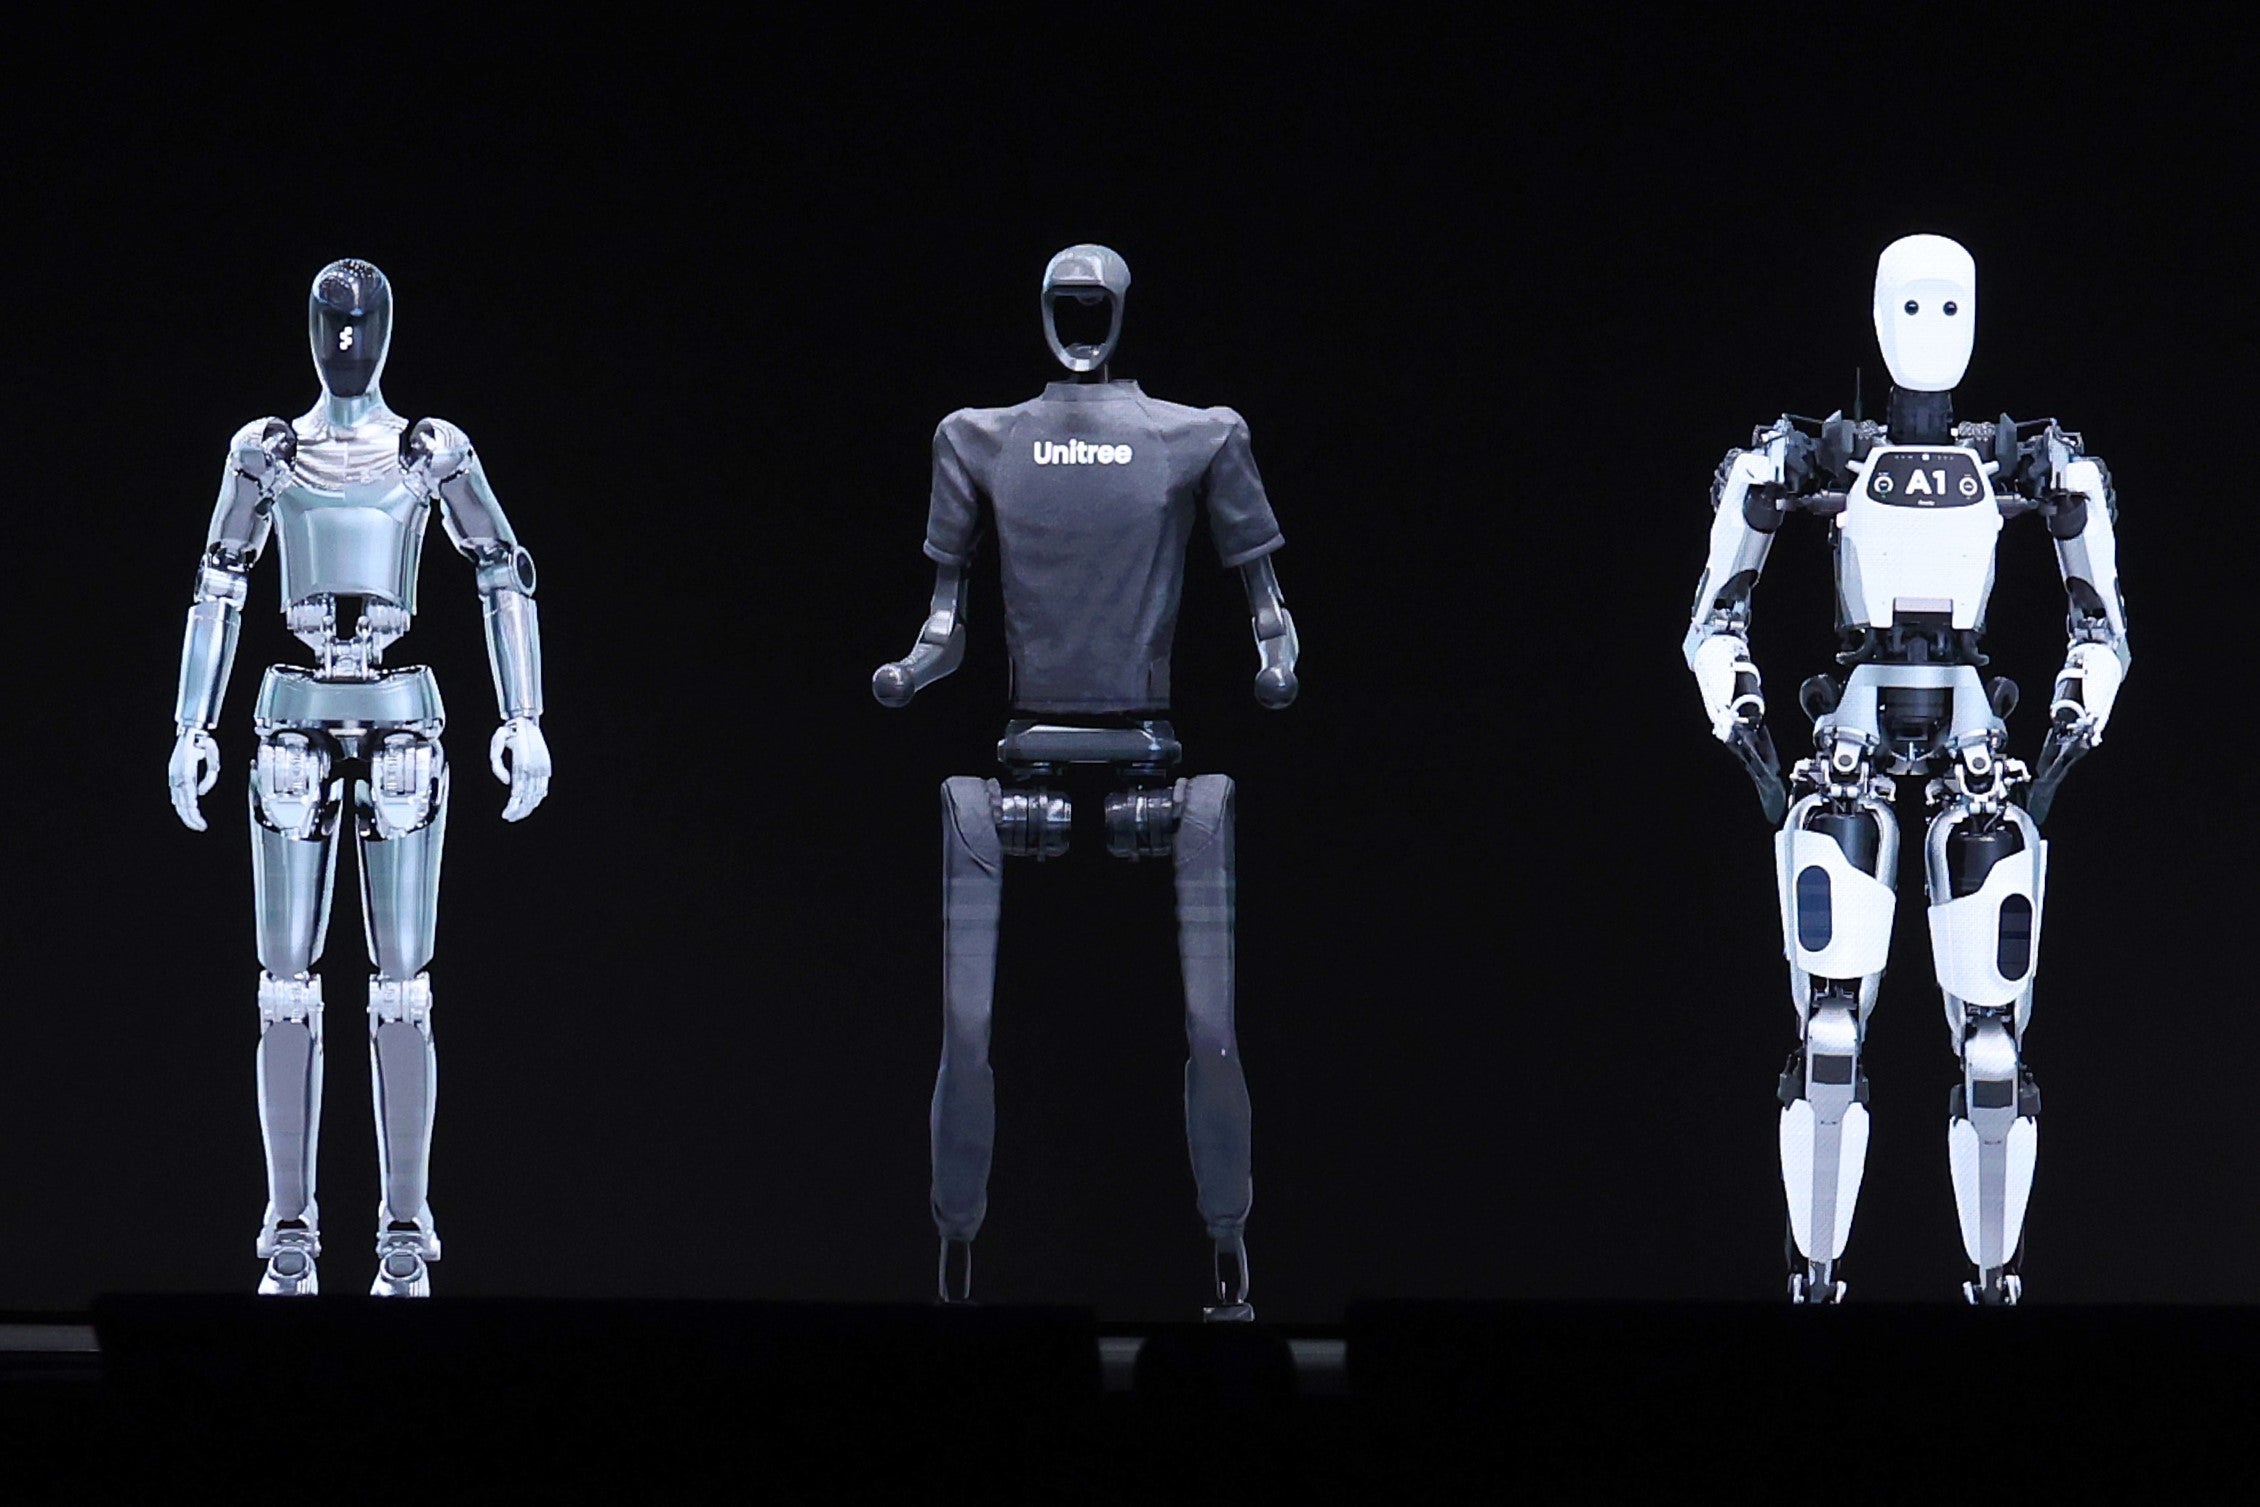 Robots powered by Nvidia’s AI chip technology, at a keynote address at an artificial intelligence conference in San Jose, California